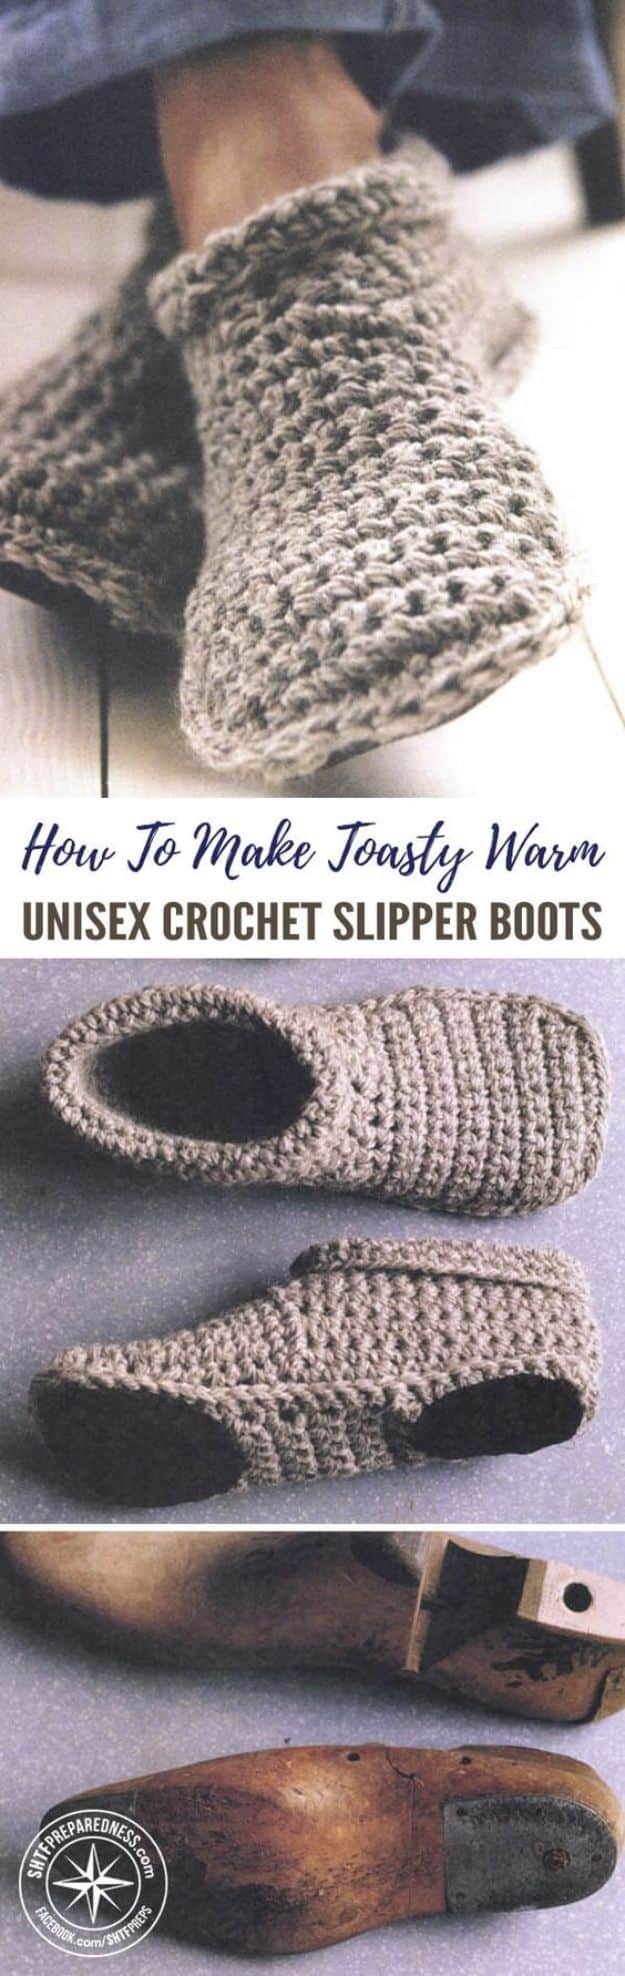 DIY Ideas For Your Boots | Unisex Crochet Slipper Boots l Cool Way to Update Old Leather Boot | Denim, Painting, Decorating Cowboy Boots